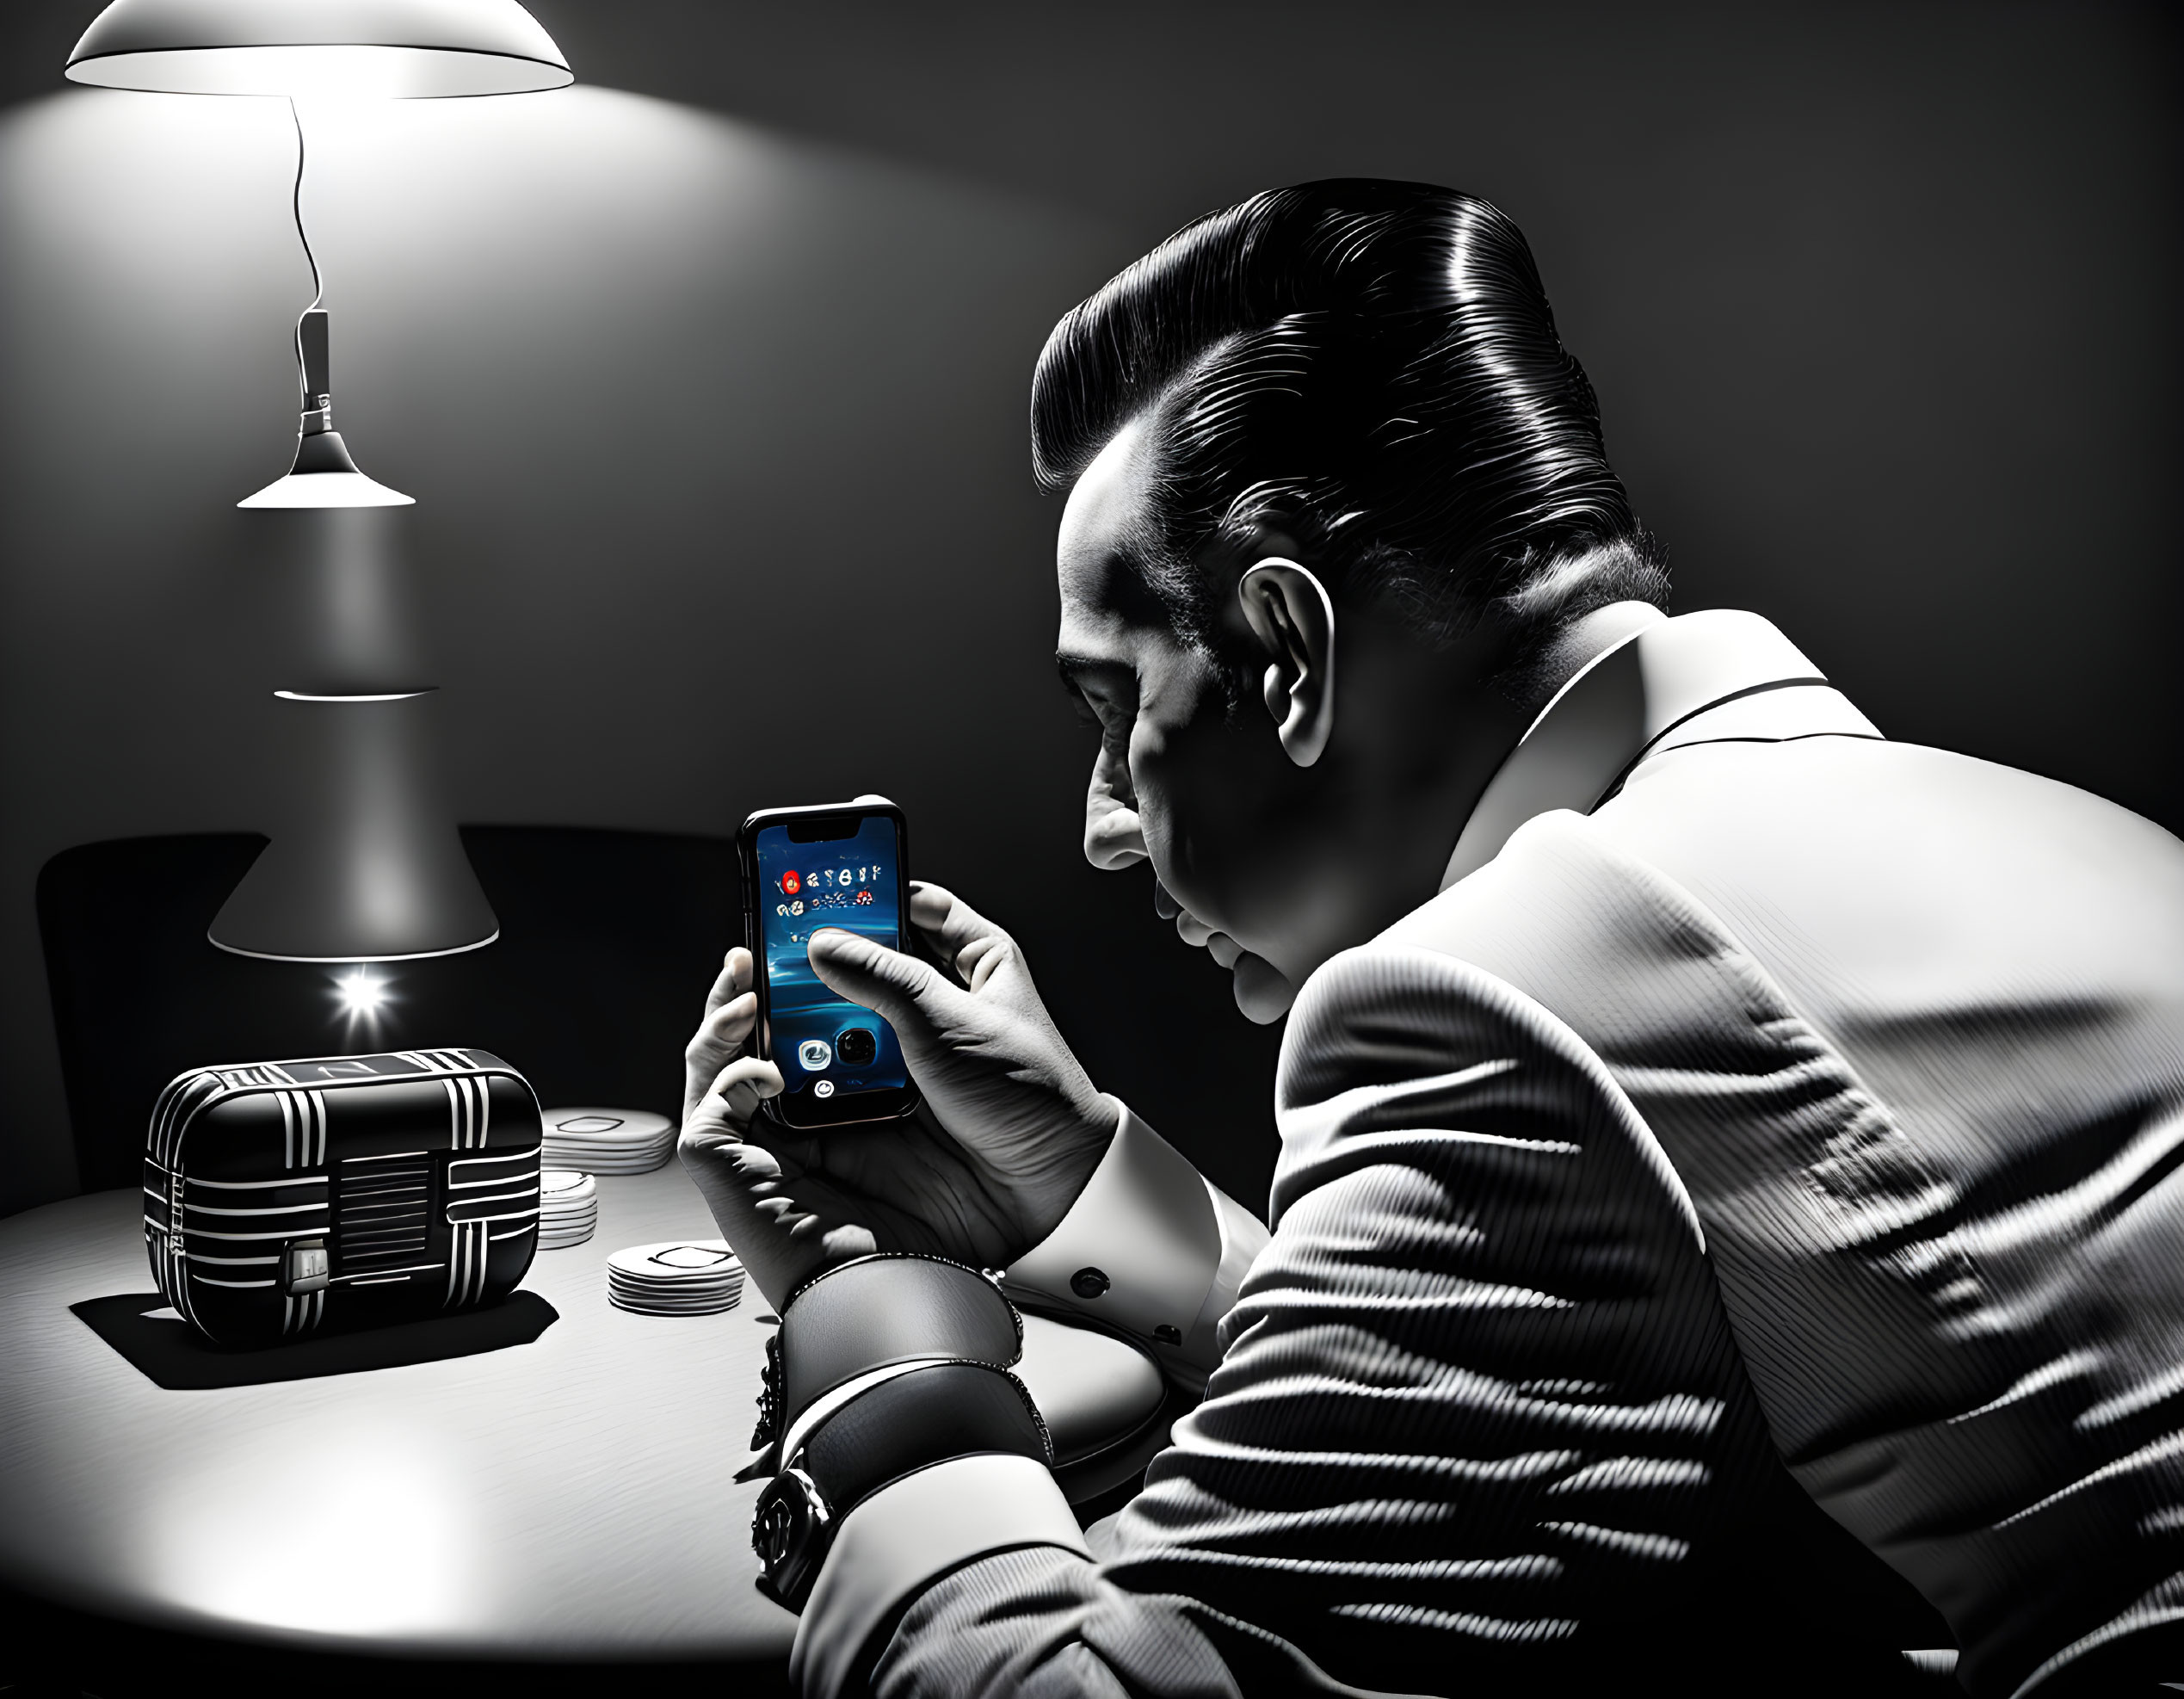 Monochrome illustration of a man in a suit with slicked hair checking smartphone at a table with poker